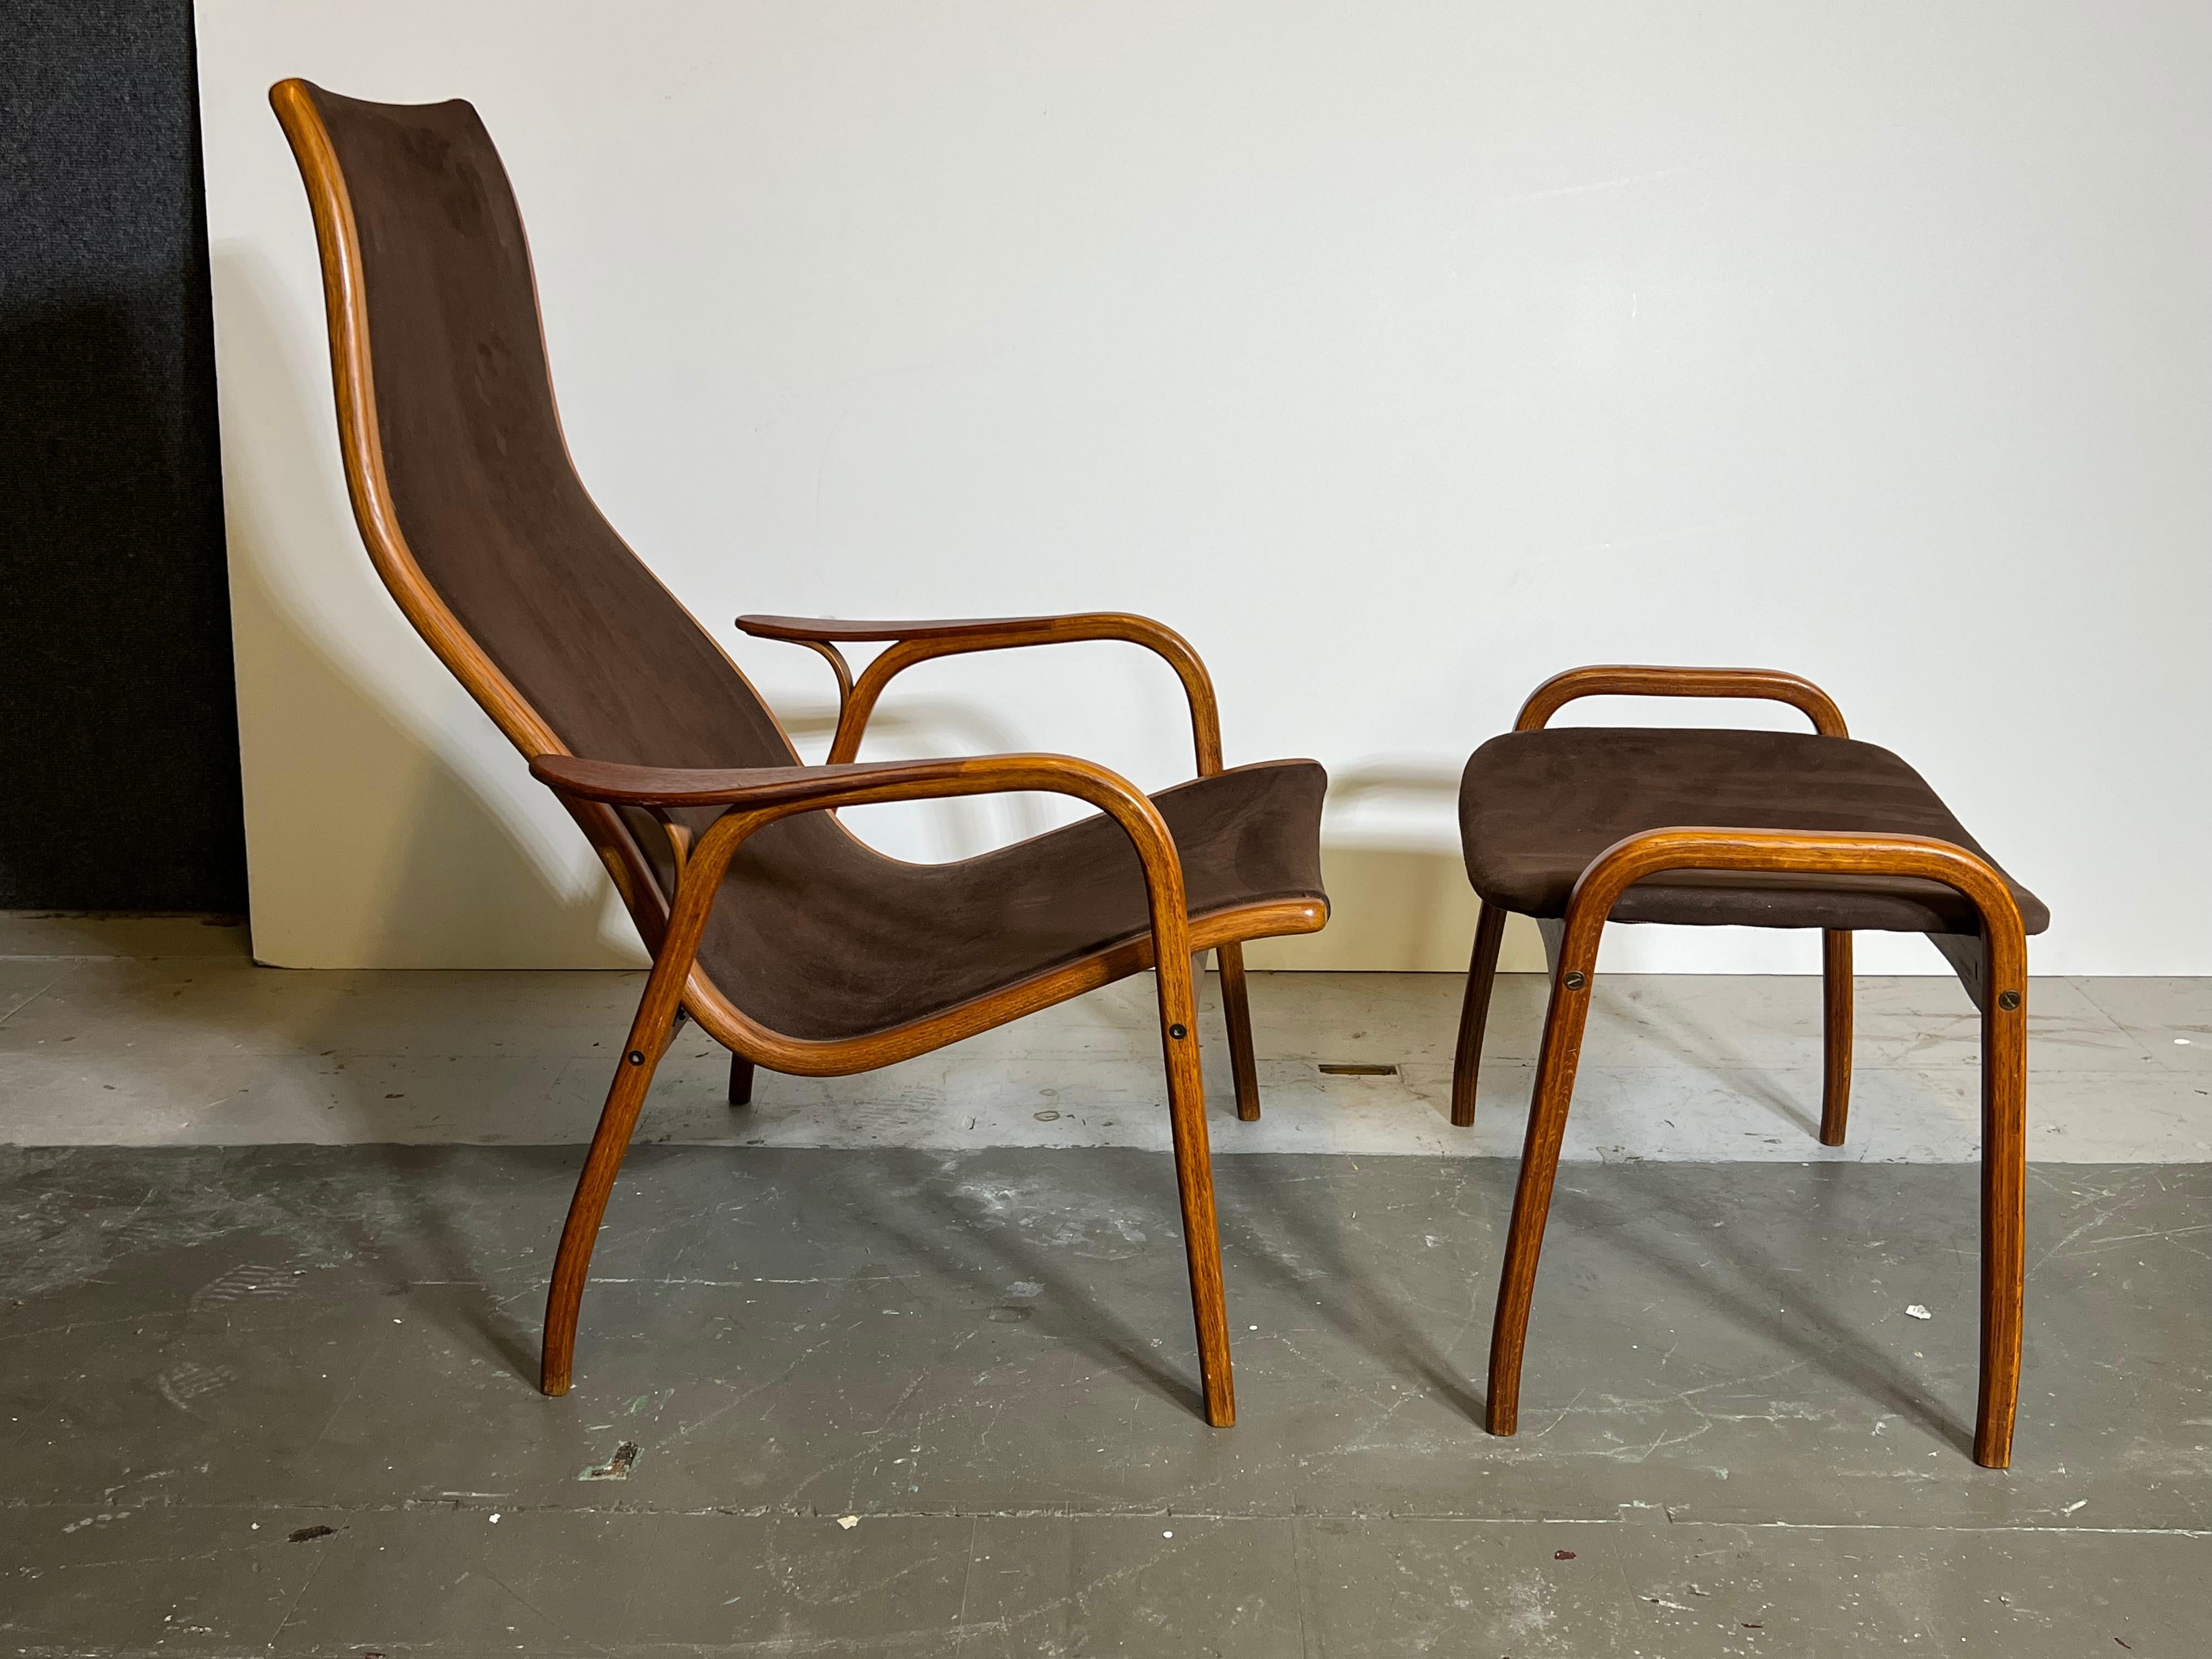 The set was designed by Swedish designer Yngve Ekström (1913-1988) in 1956 and manufactured by Swedese Möbler in Sweden.
This exceptionally light and comfortable chair, as well as its footstool are made of bent beech plywood and are recovered in